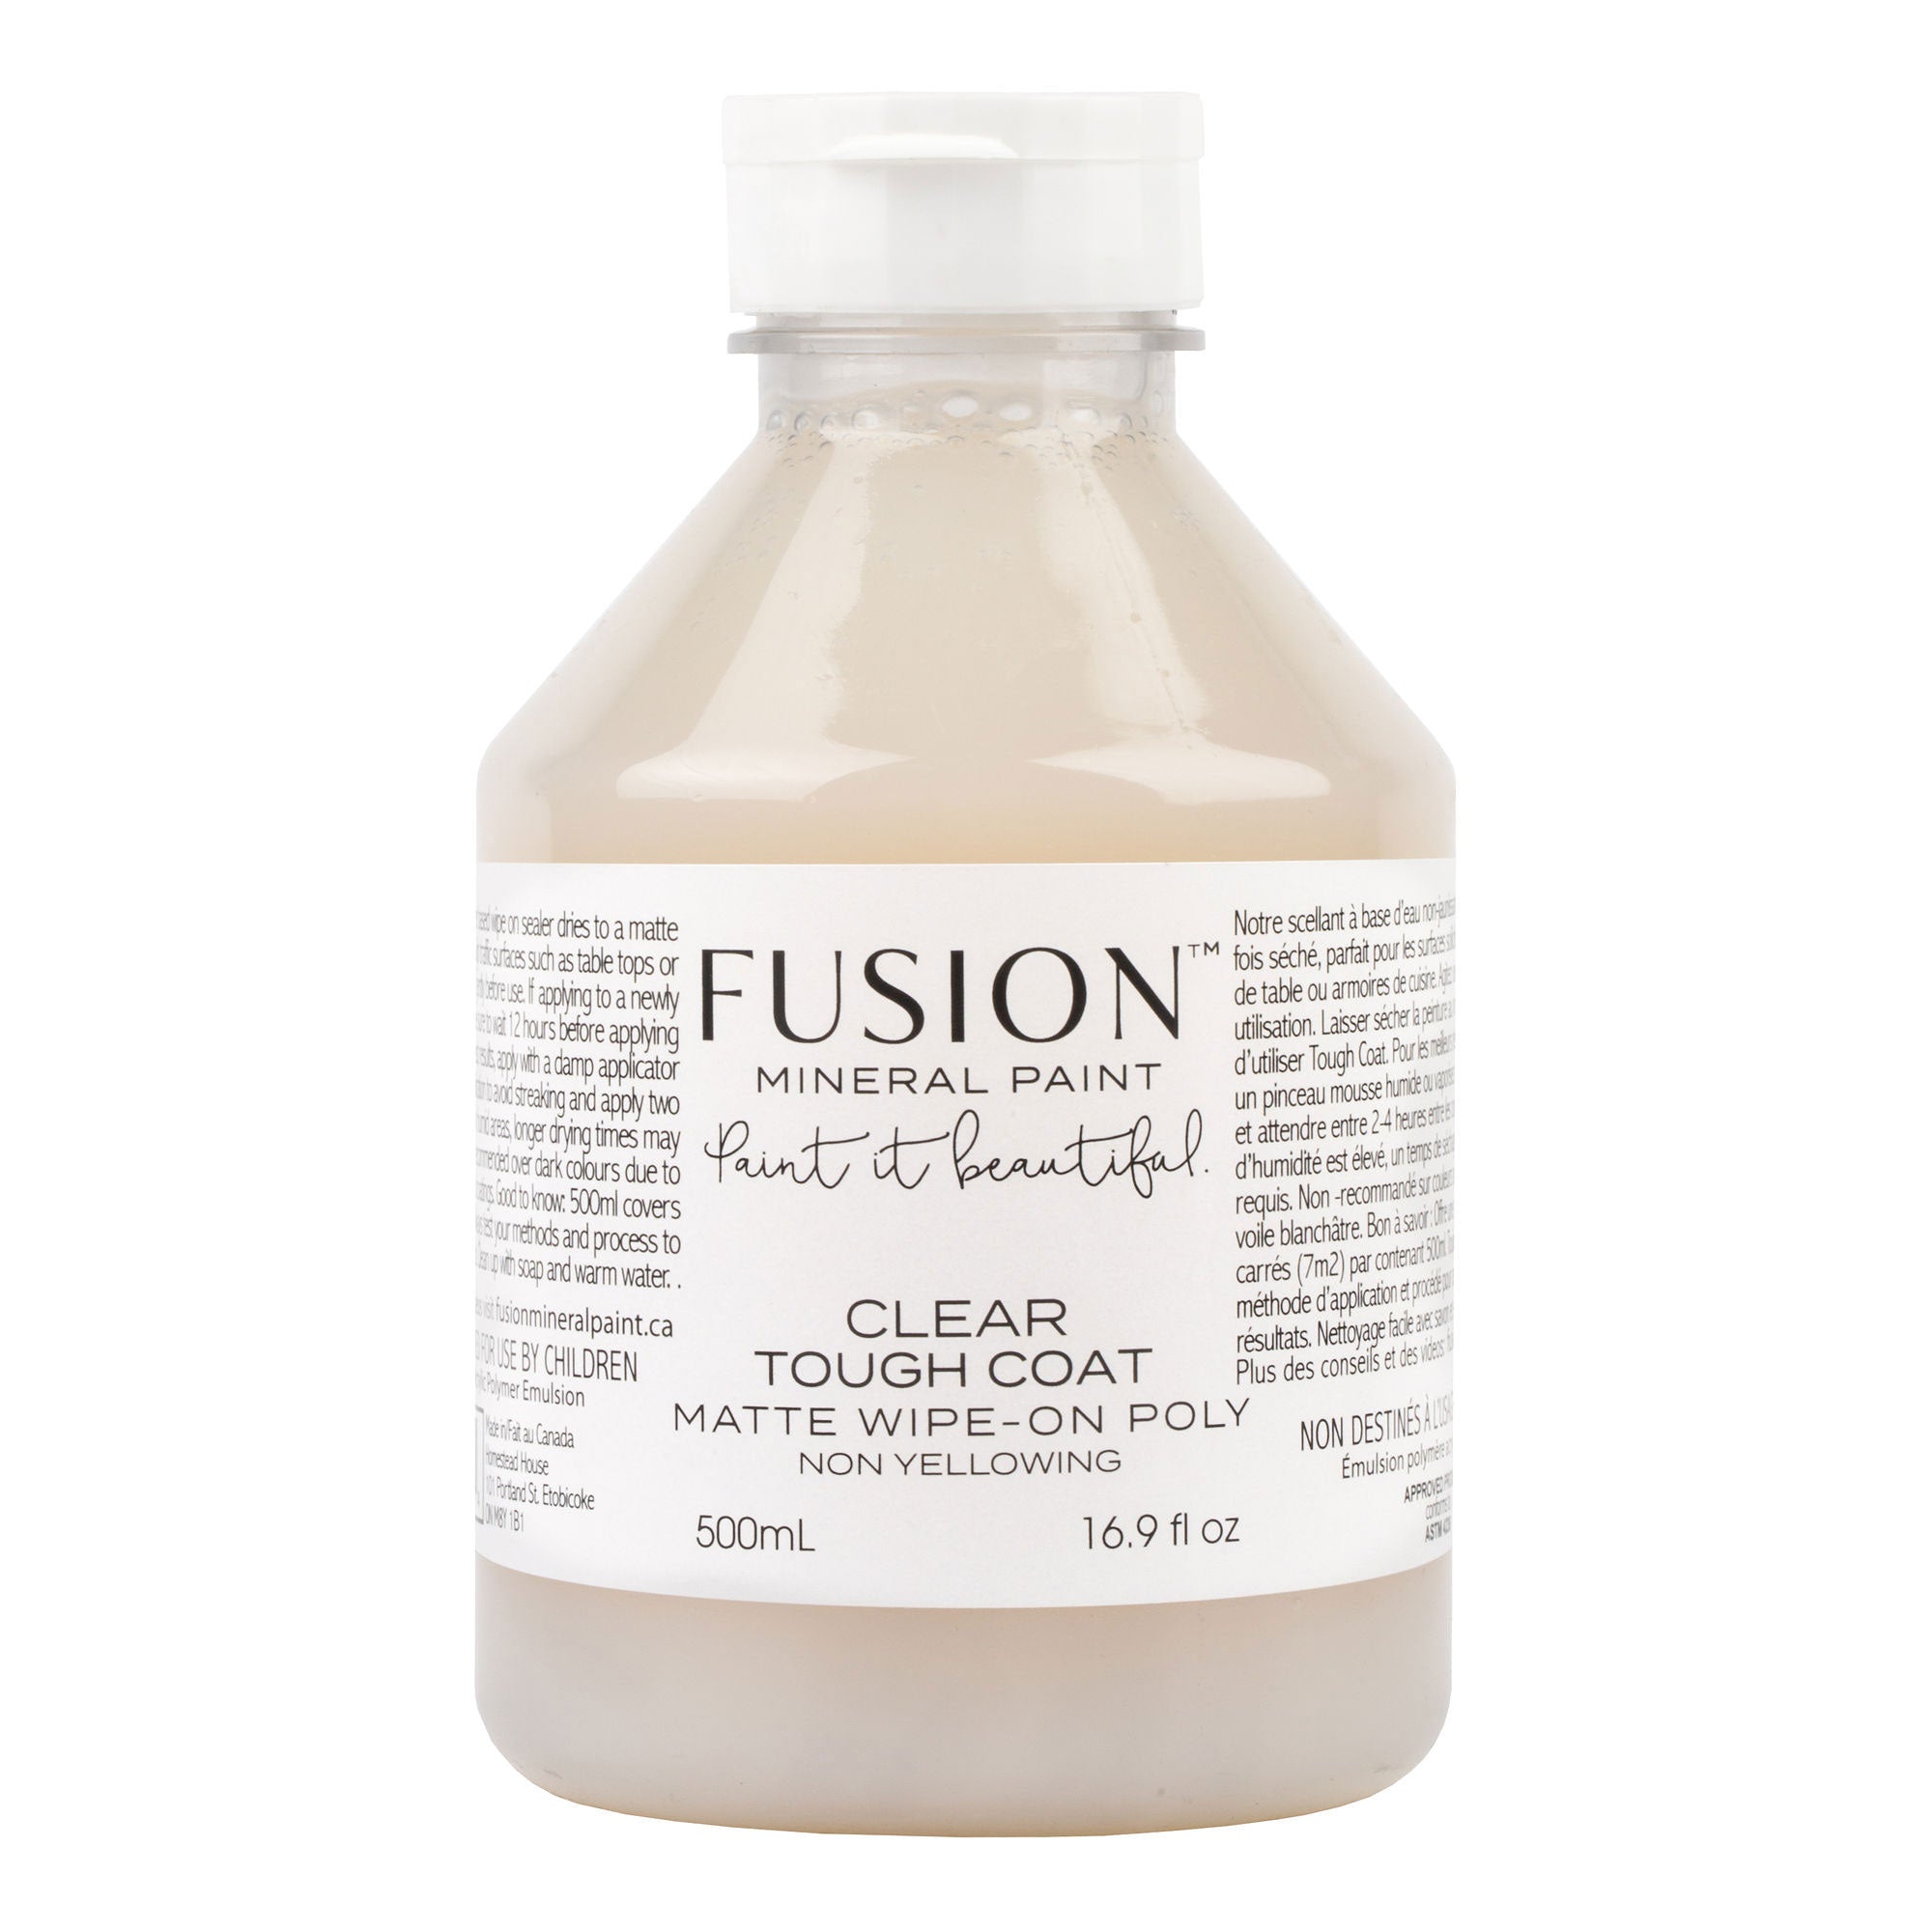 Fusion Products